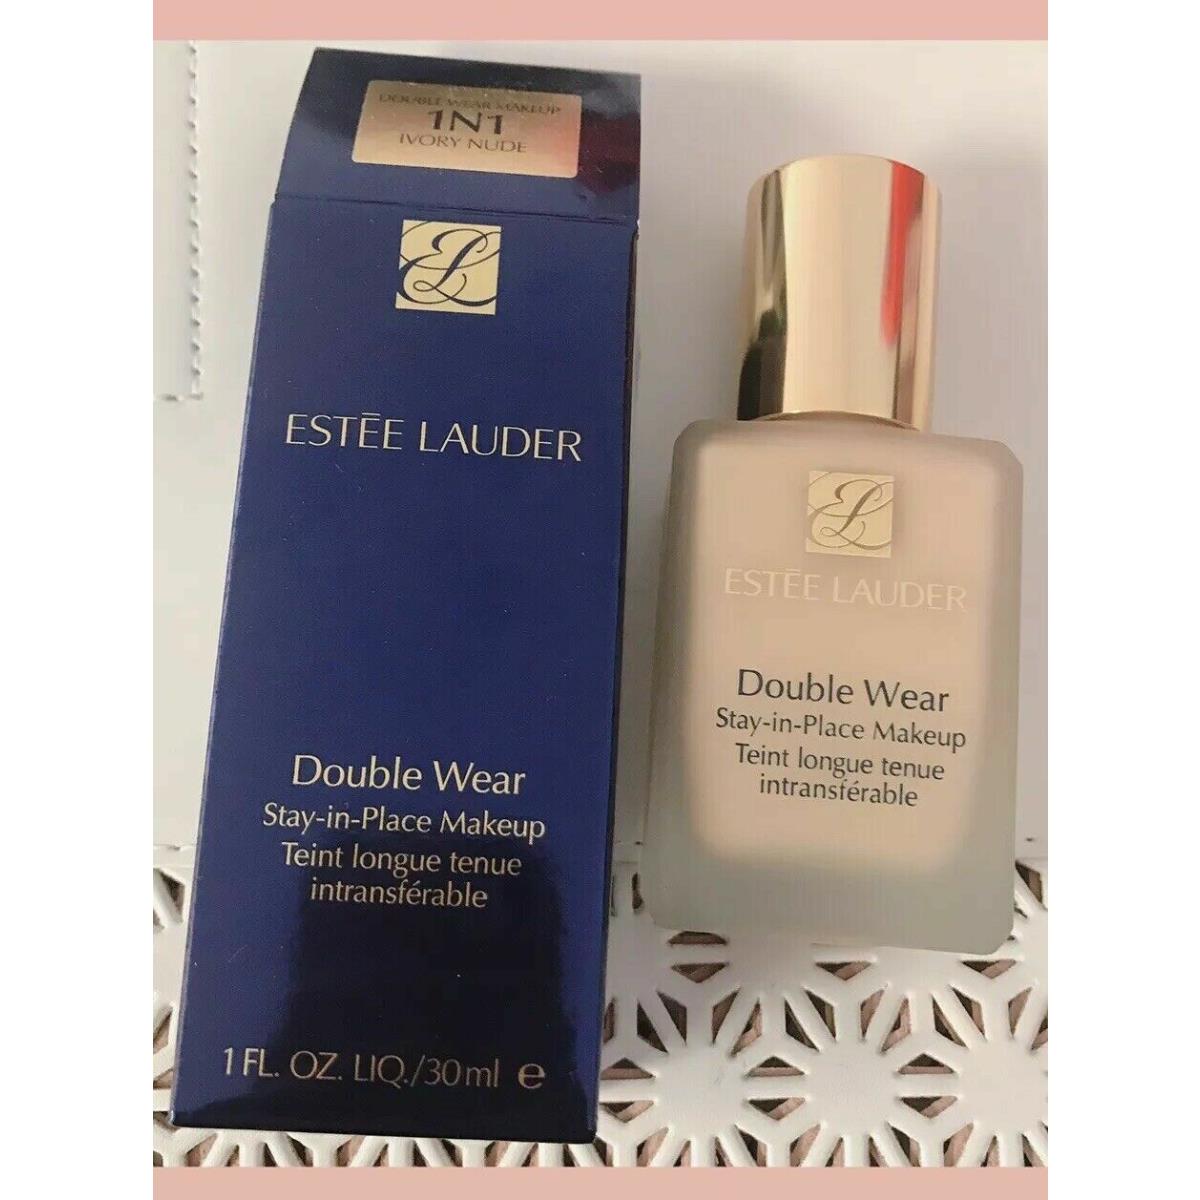 Estee Lauder Double Wear Stay-in-place Makeup 1N1 Ivory 1oz Primer 1oz